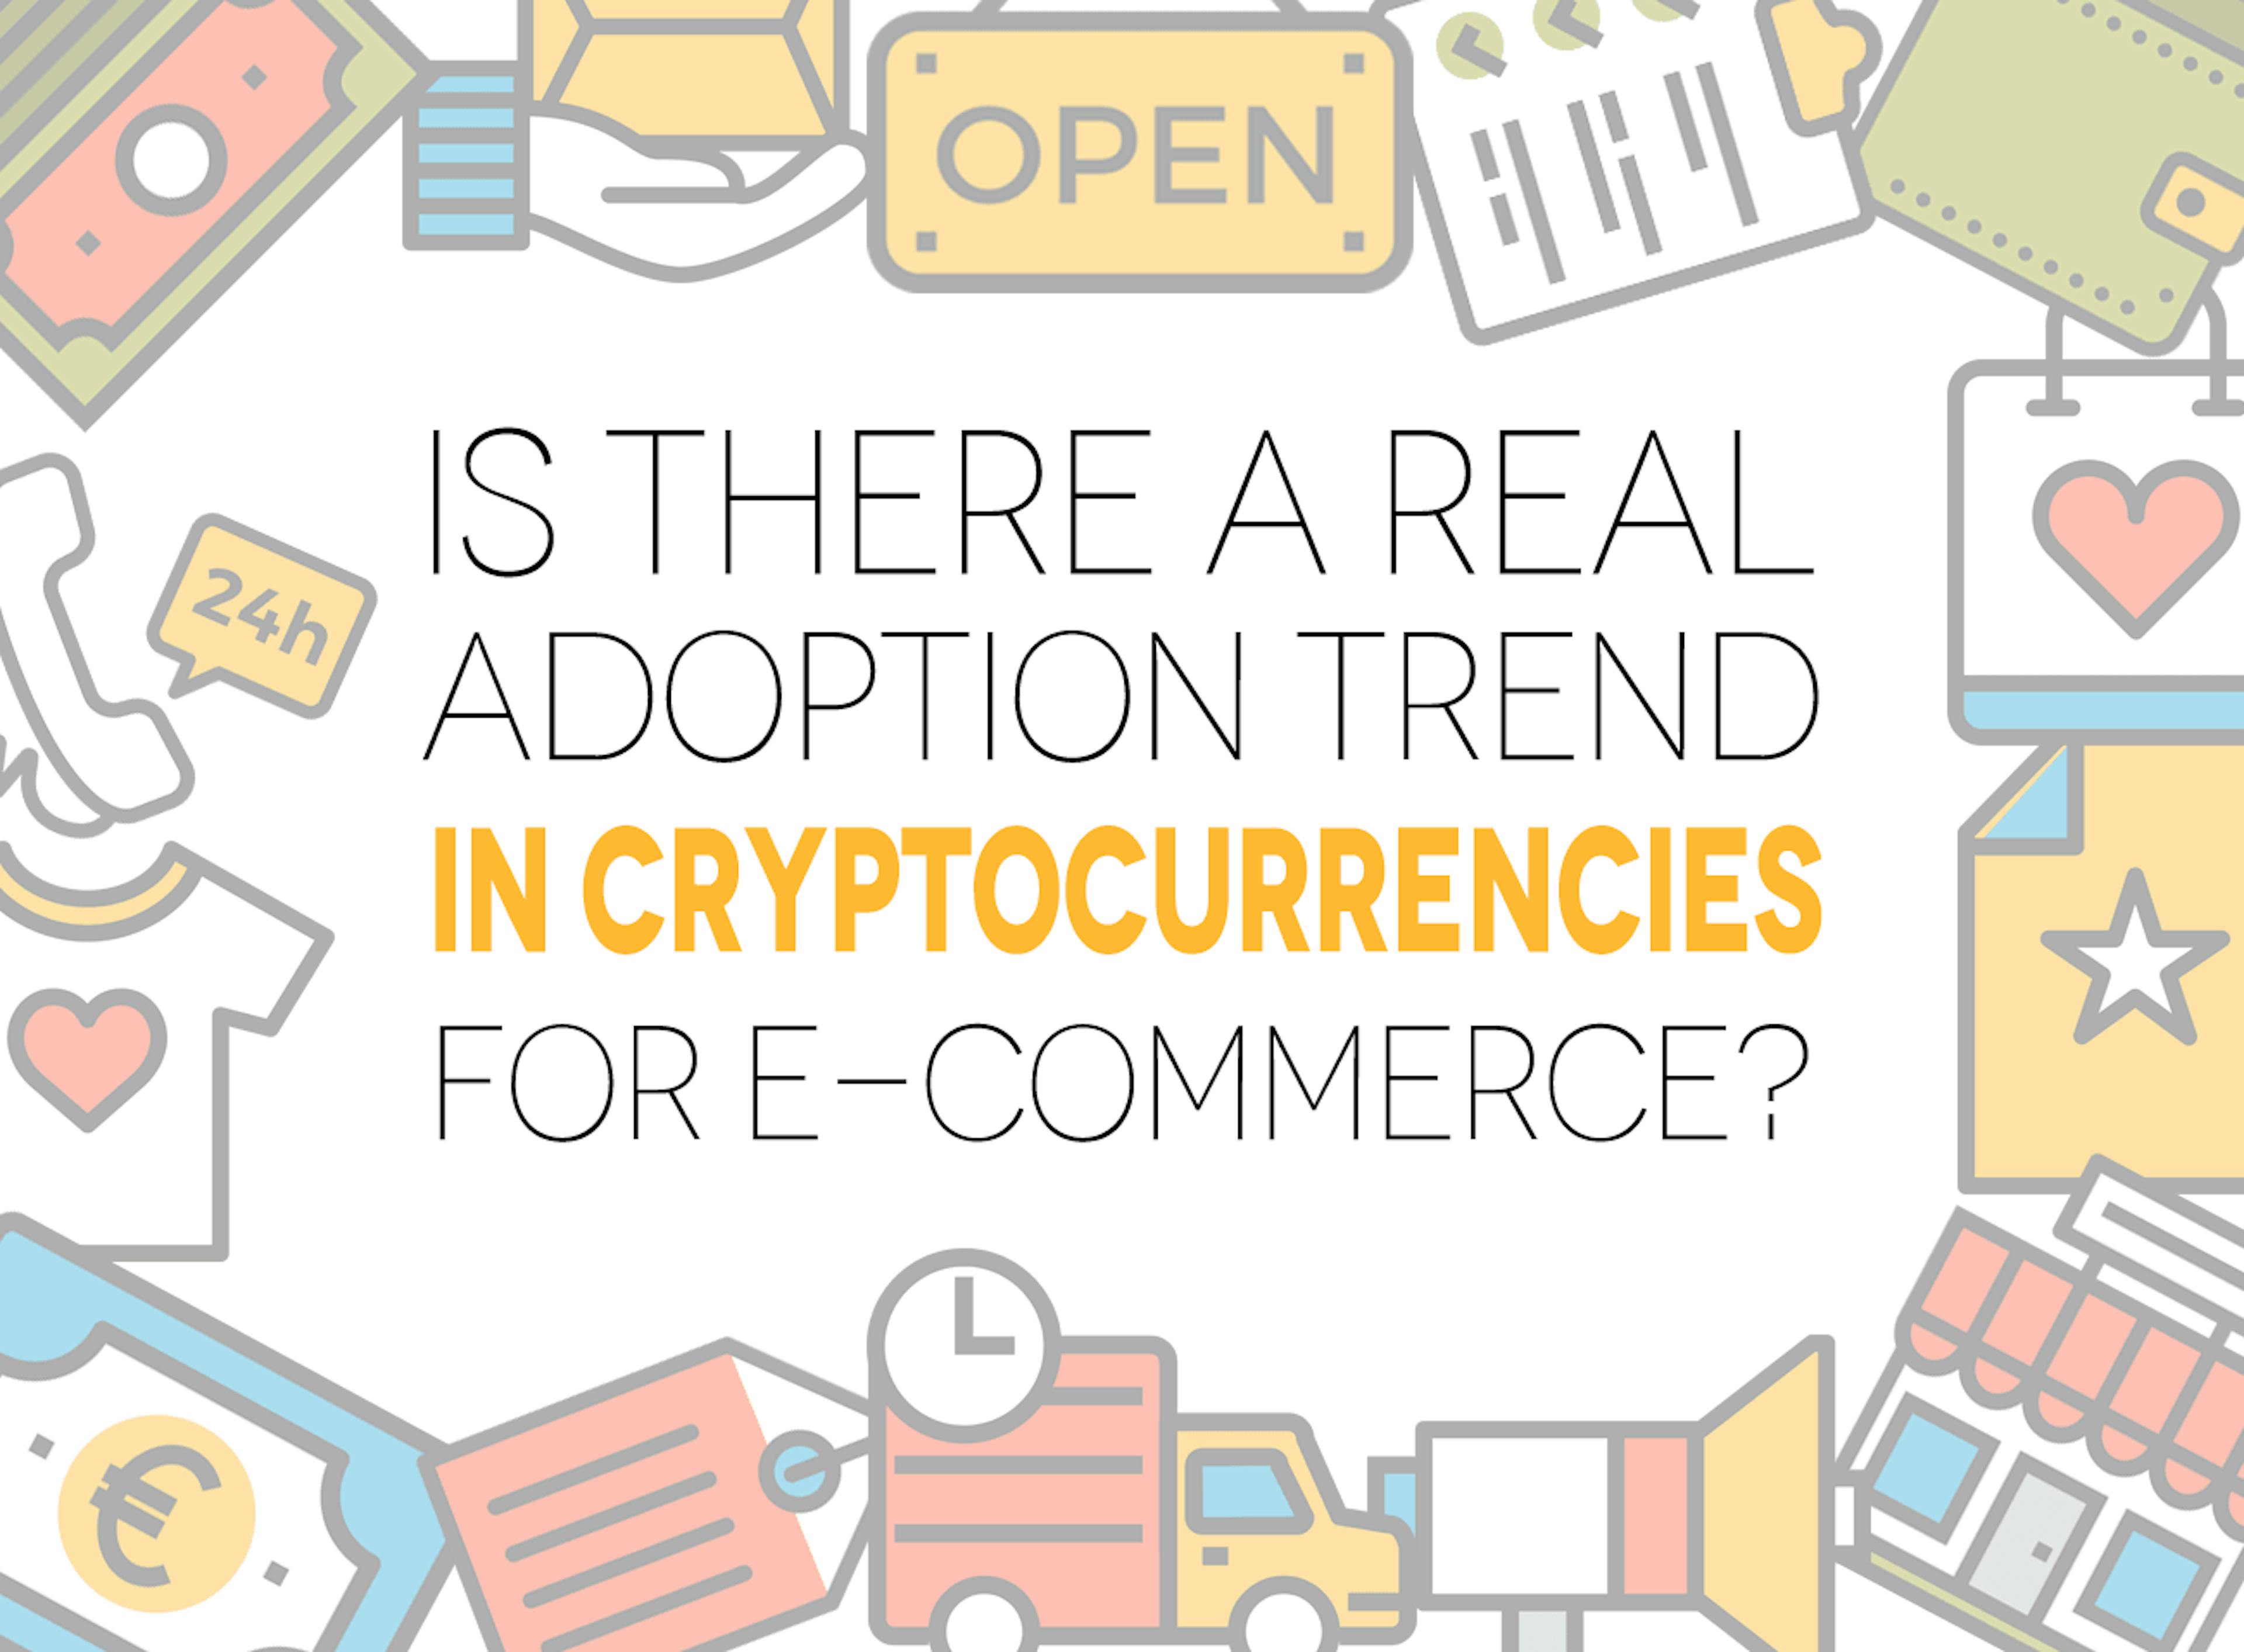 /is-there-a-real-adoption-trend-in-cryptocurrencies-for-e-commerce-570cdac4177a feature image